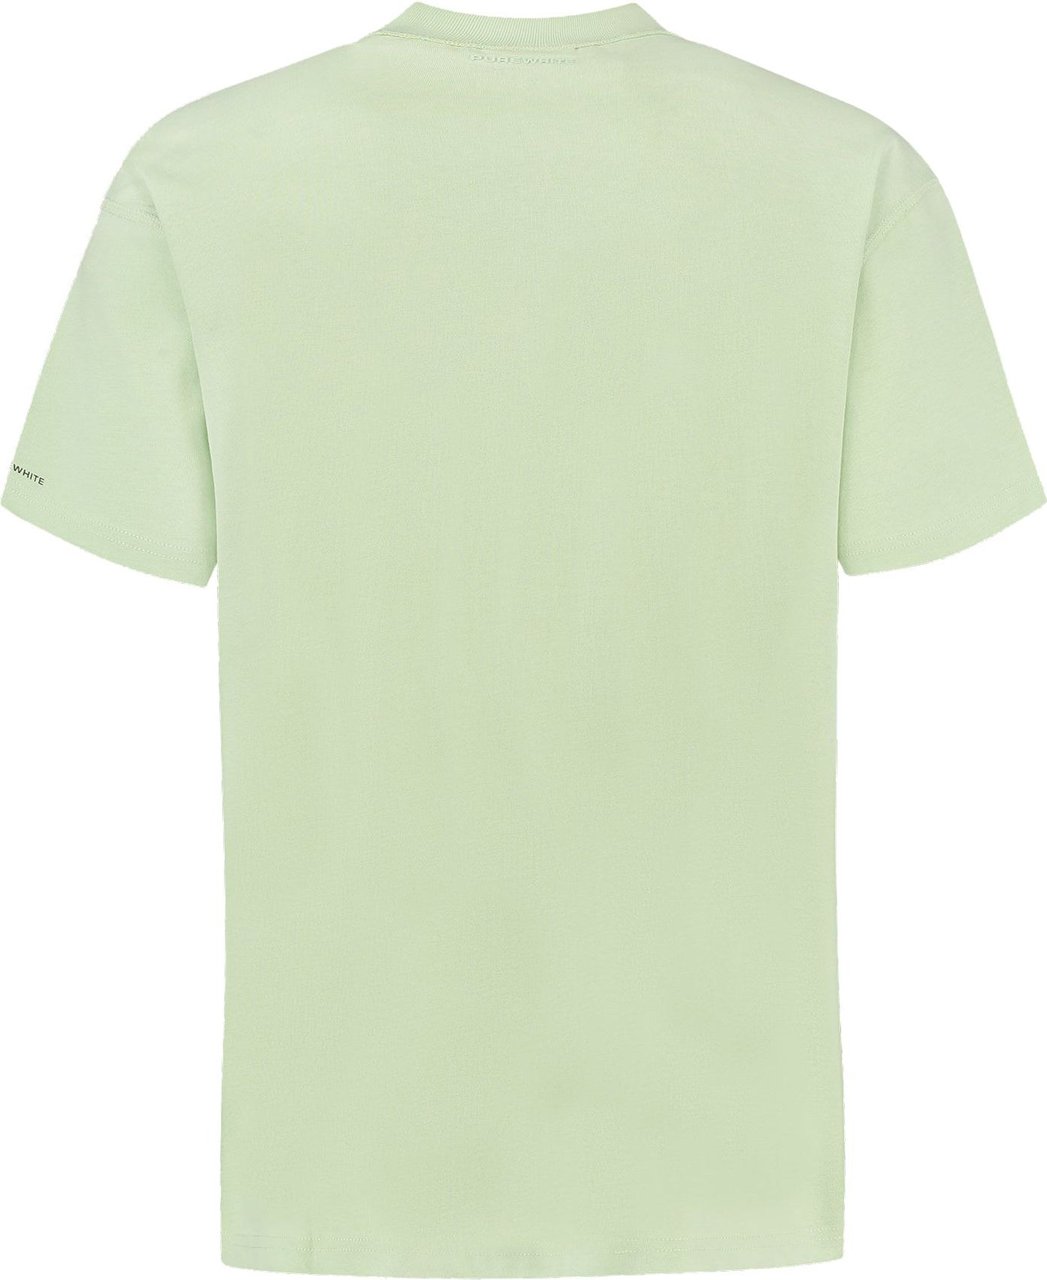 Purewhite Purewhite Ultimate Relaxed Fit T-shirt Licht Groen Groen